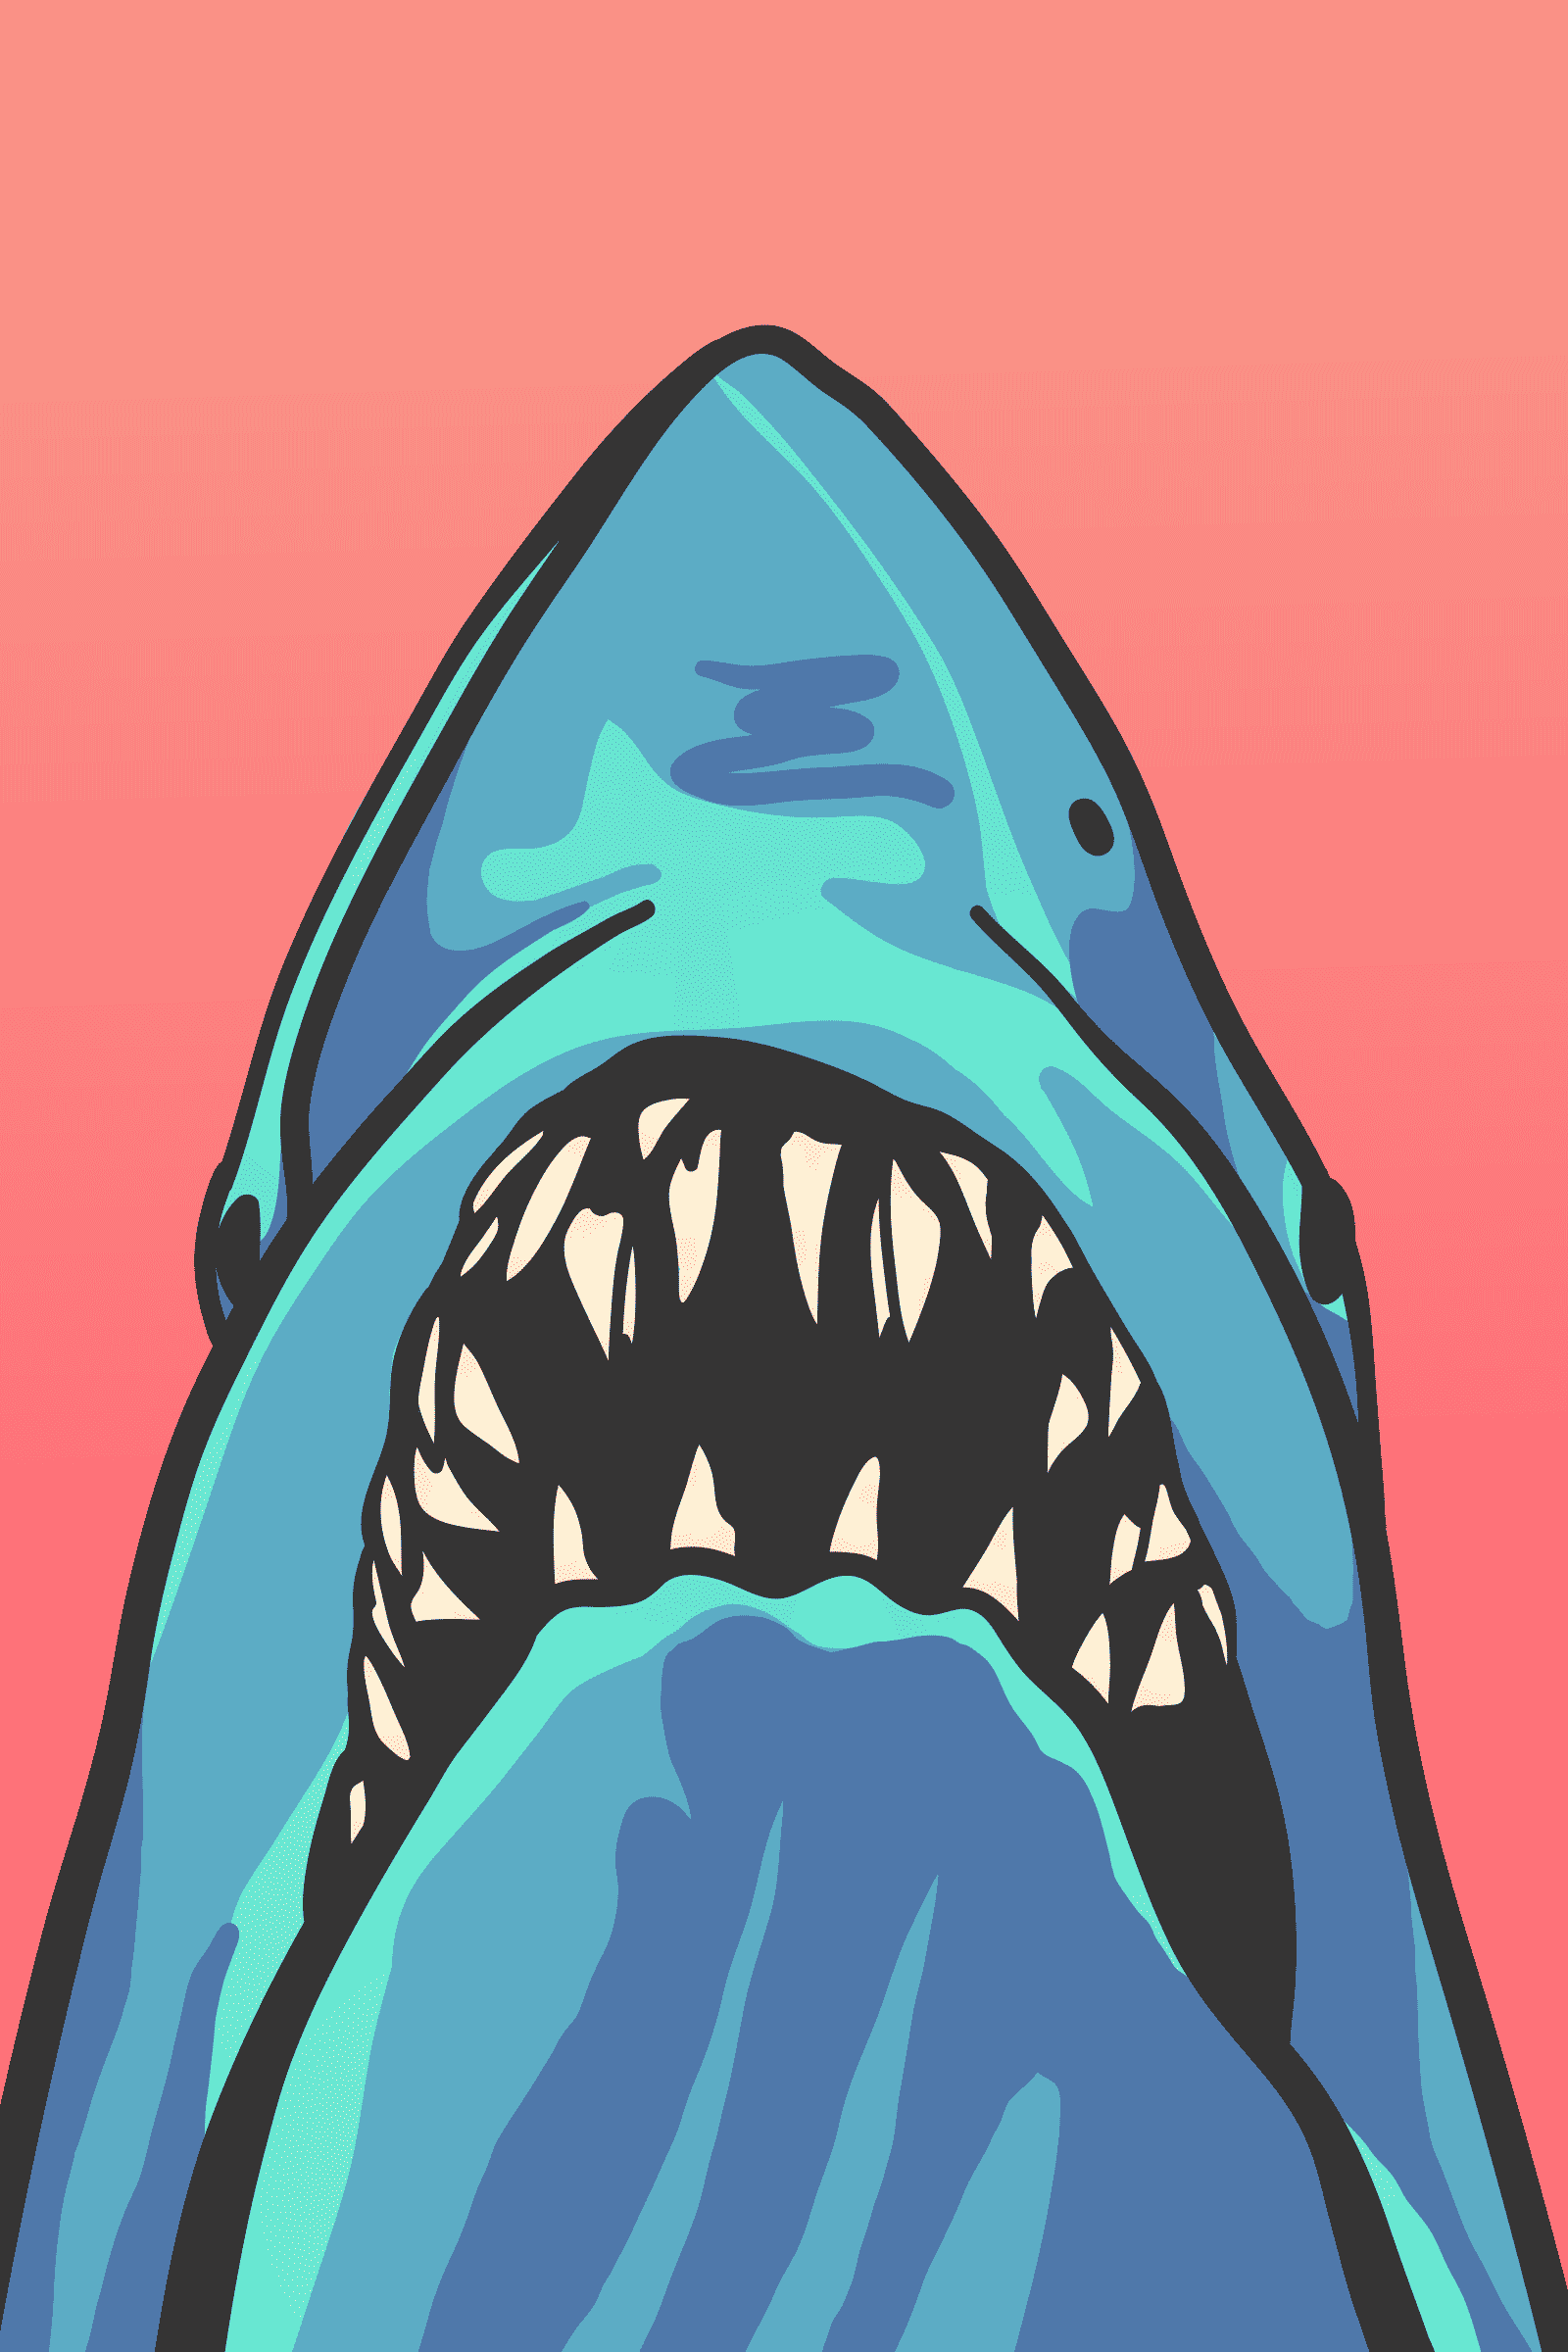 The great white shark, JAWS